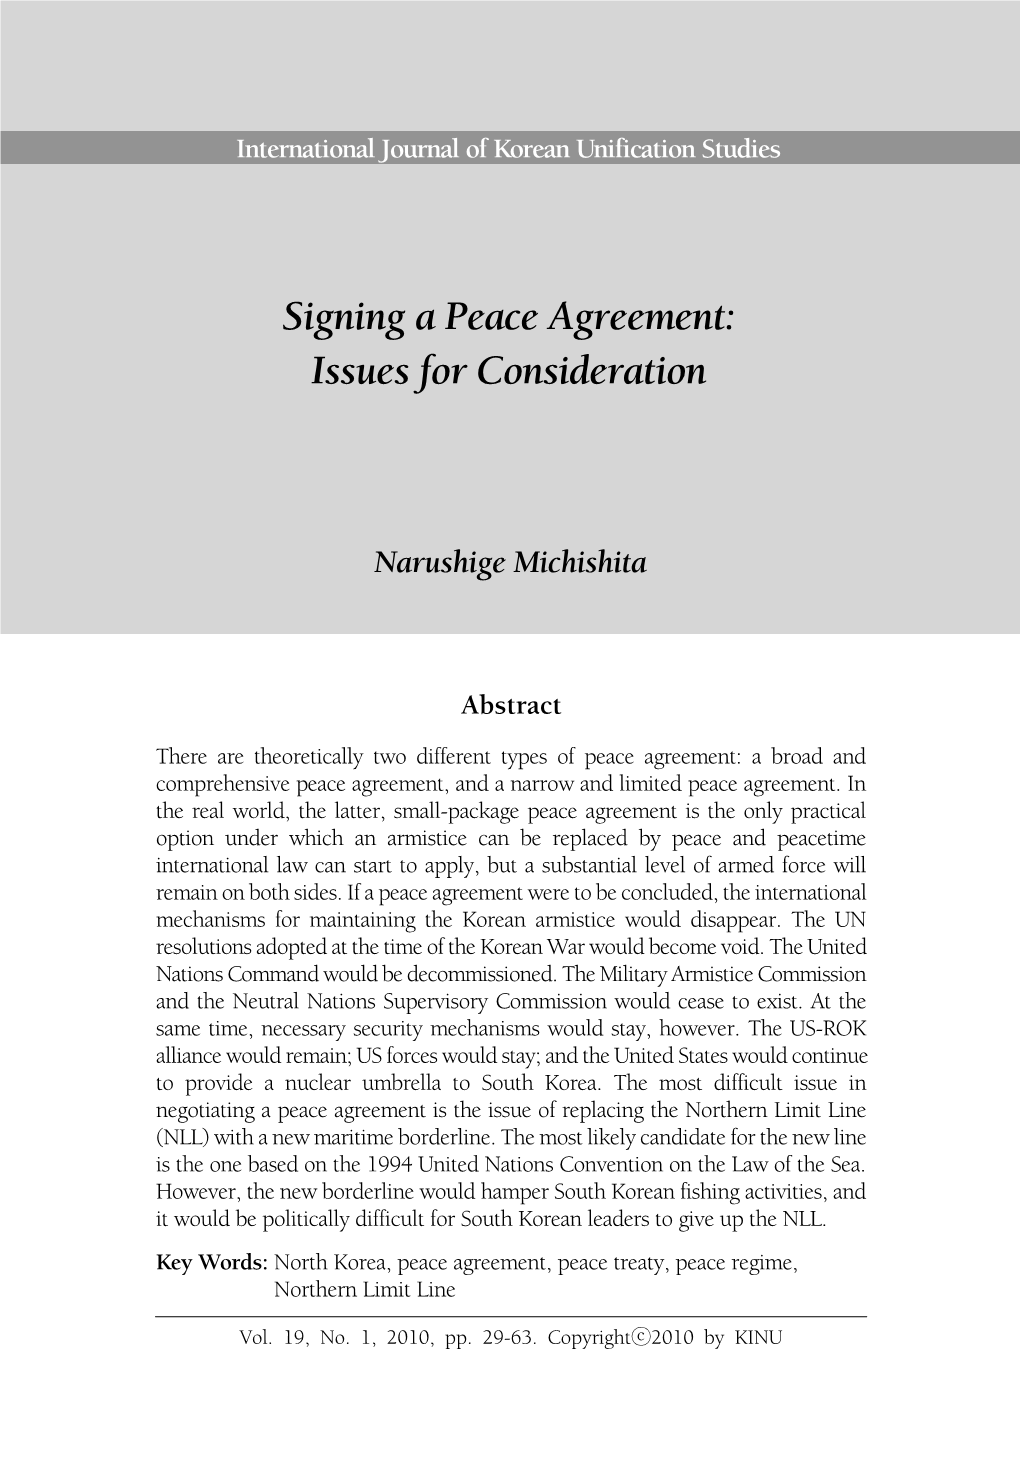 Signing a Peace Agreement: Issues for Consideration